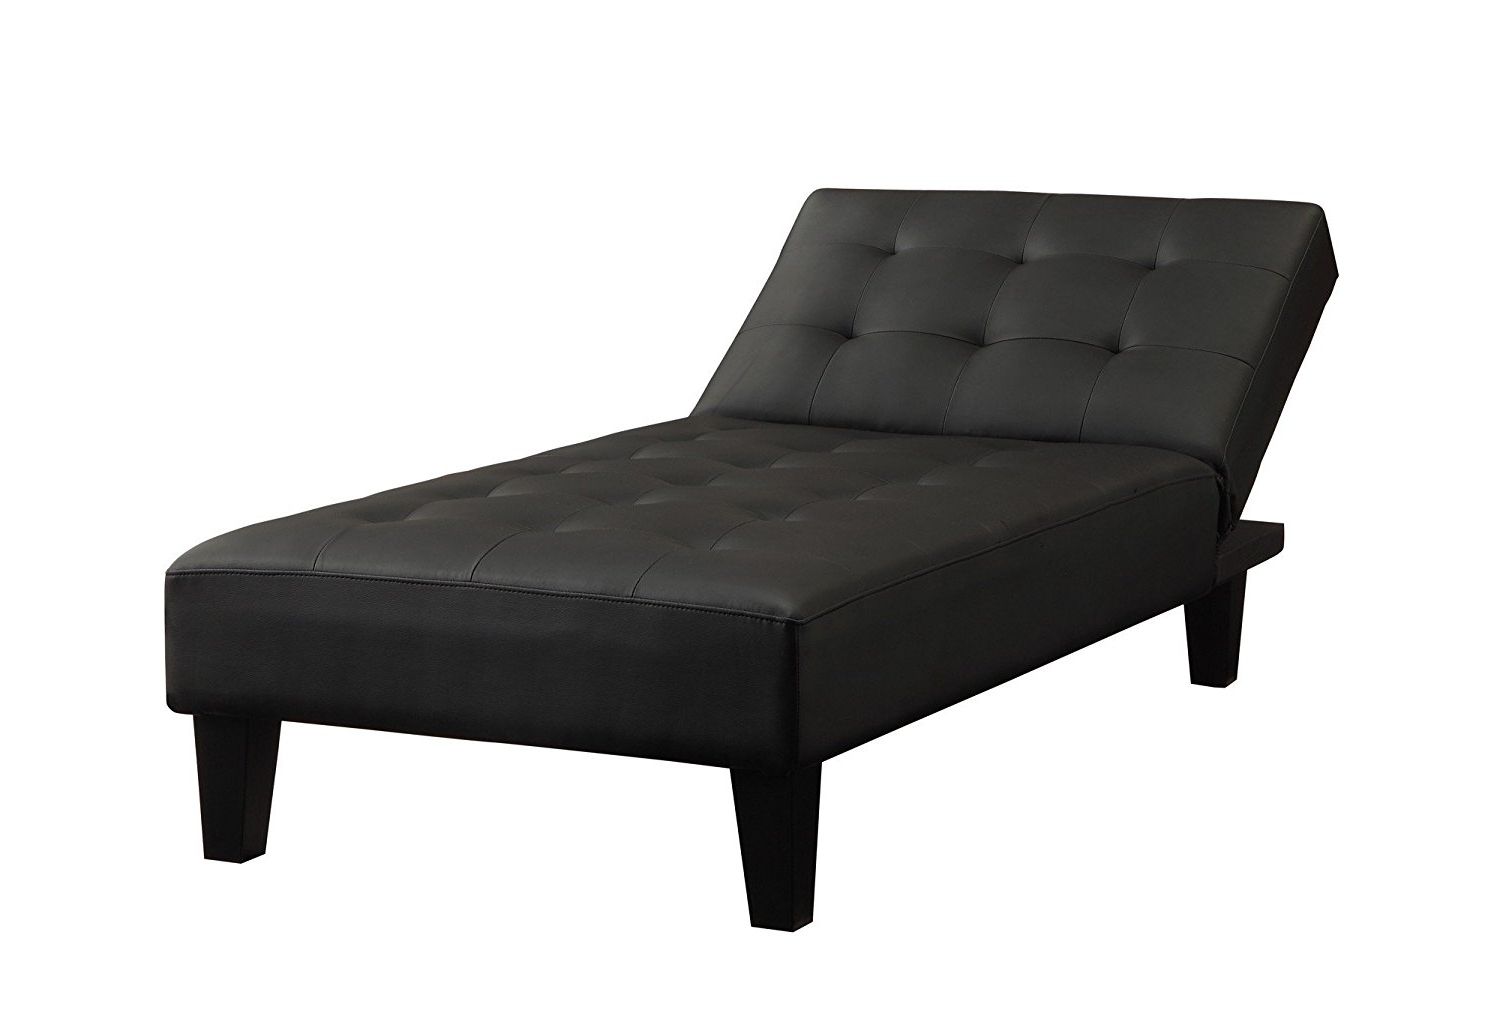 Amazon: Dhp Julia Chaise Chair Lounger, Converts To Sleeper Throughout Latest Chaise Lounge Chairs At Kohls (View 7 of 15)